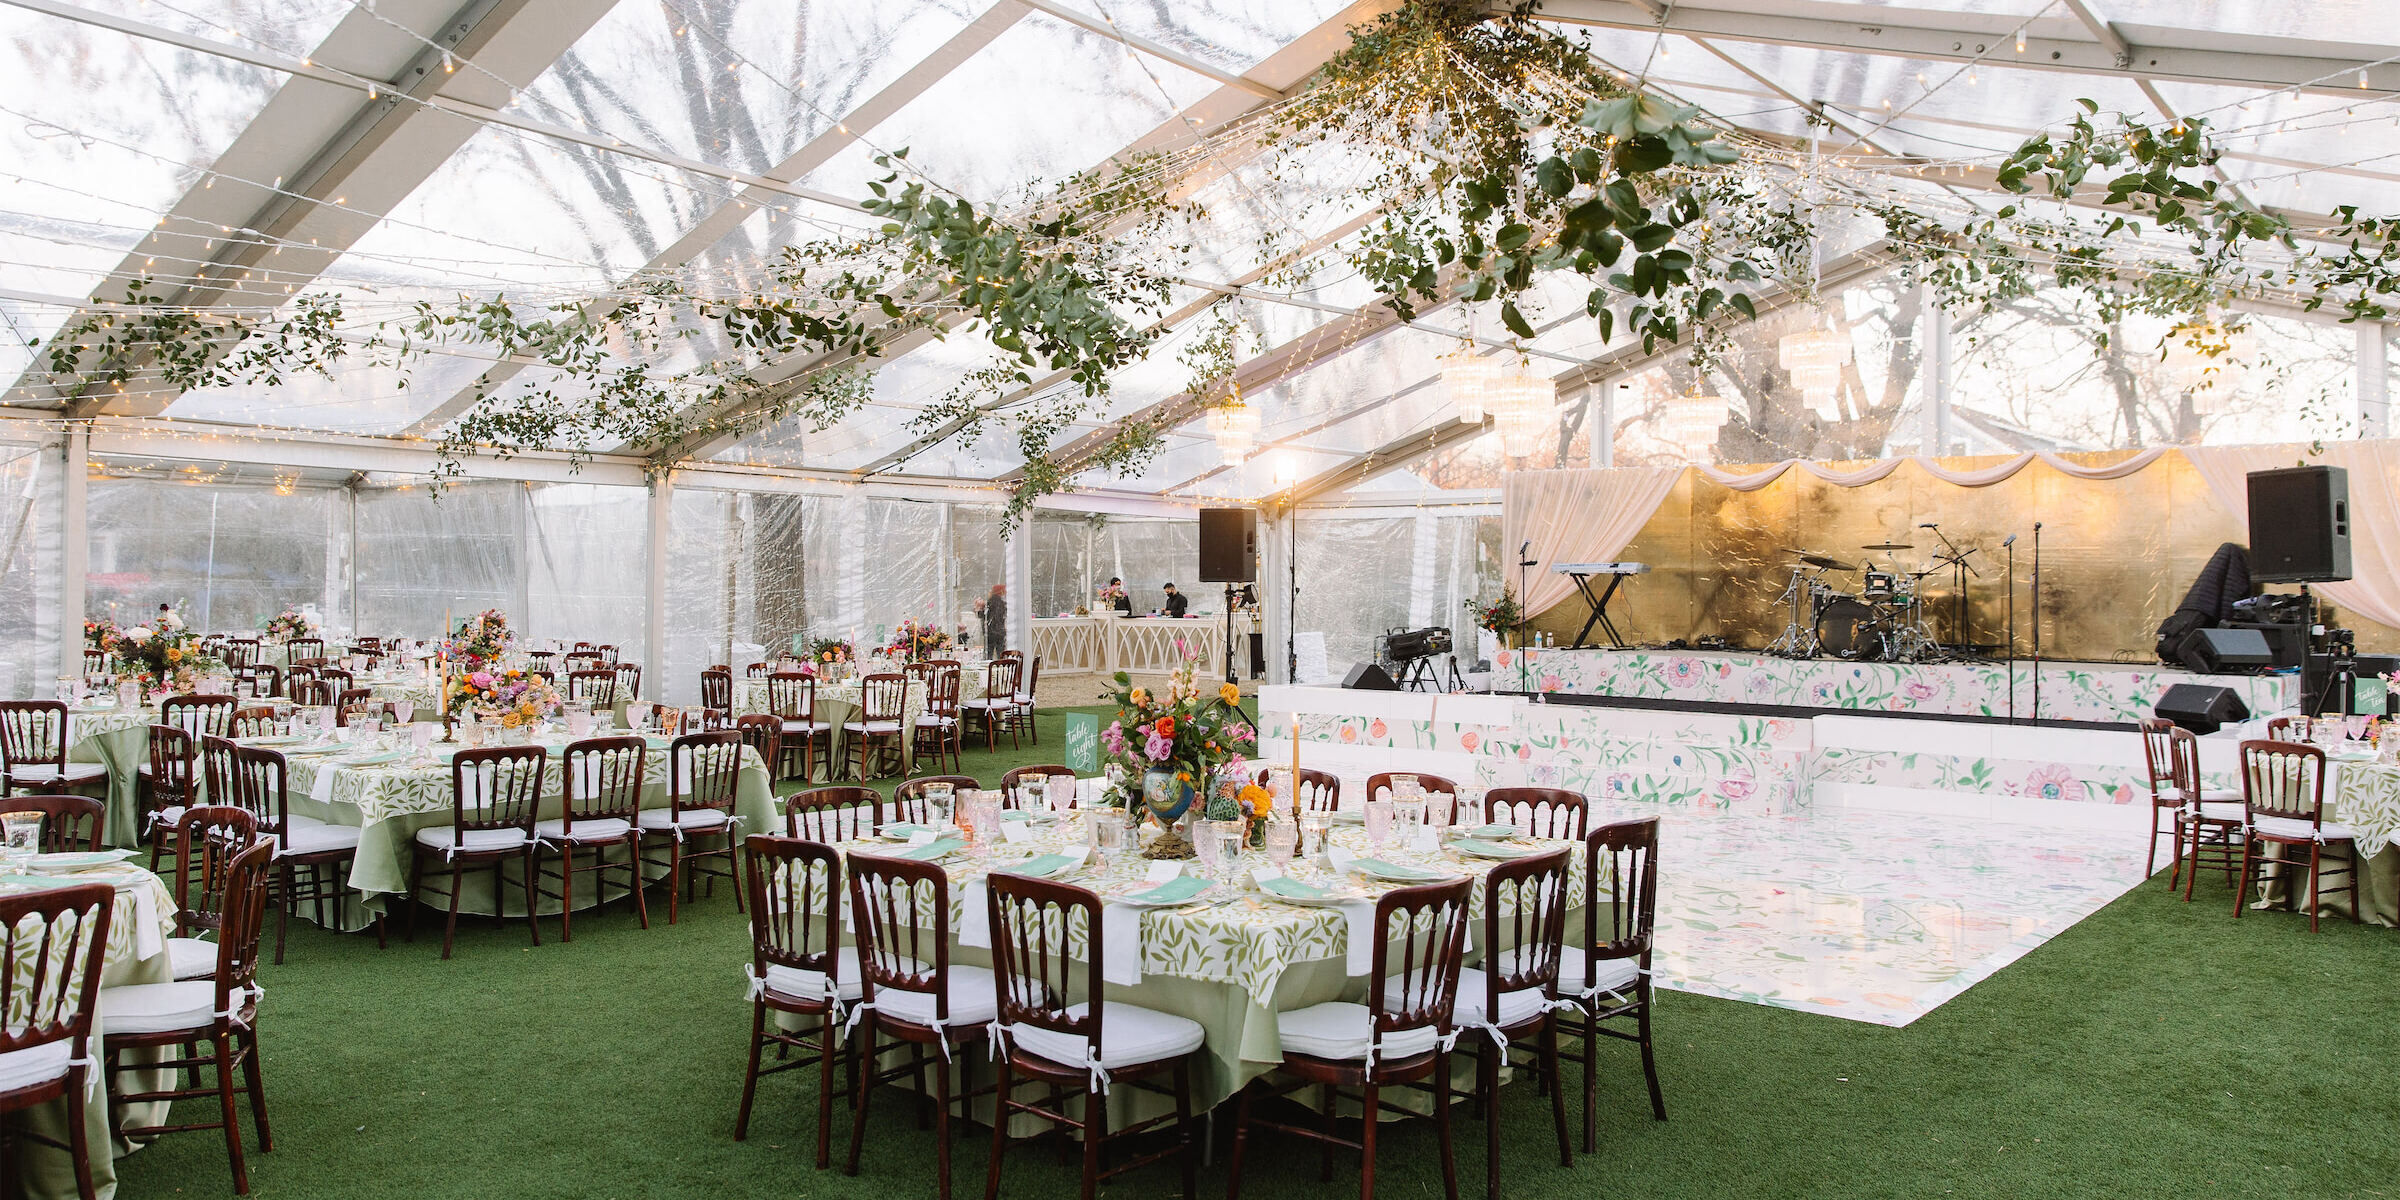 Floral themed wedding reception set up under clear top tent with hanging greenery.